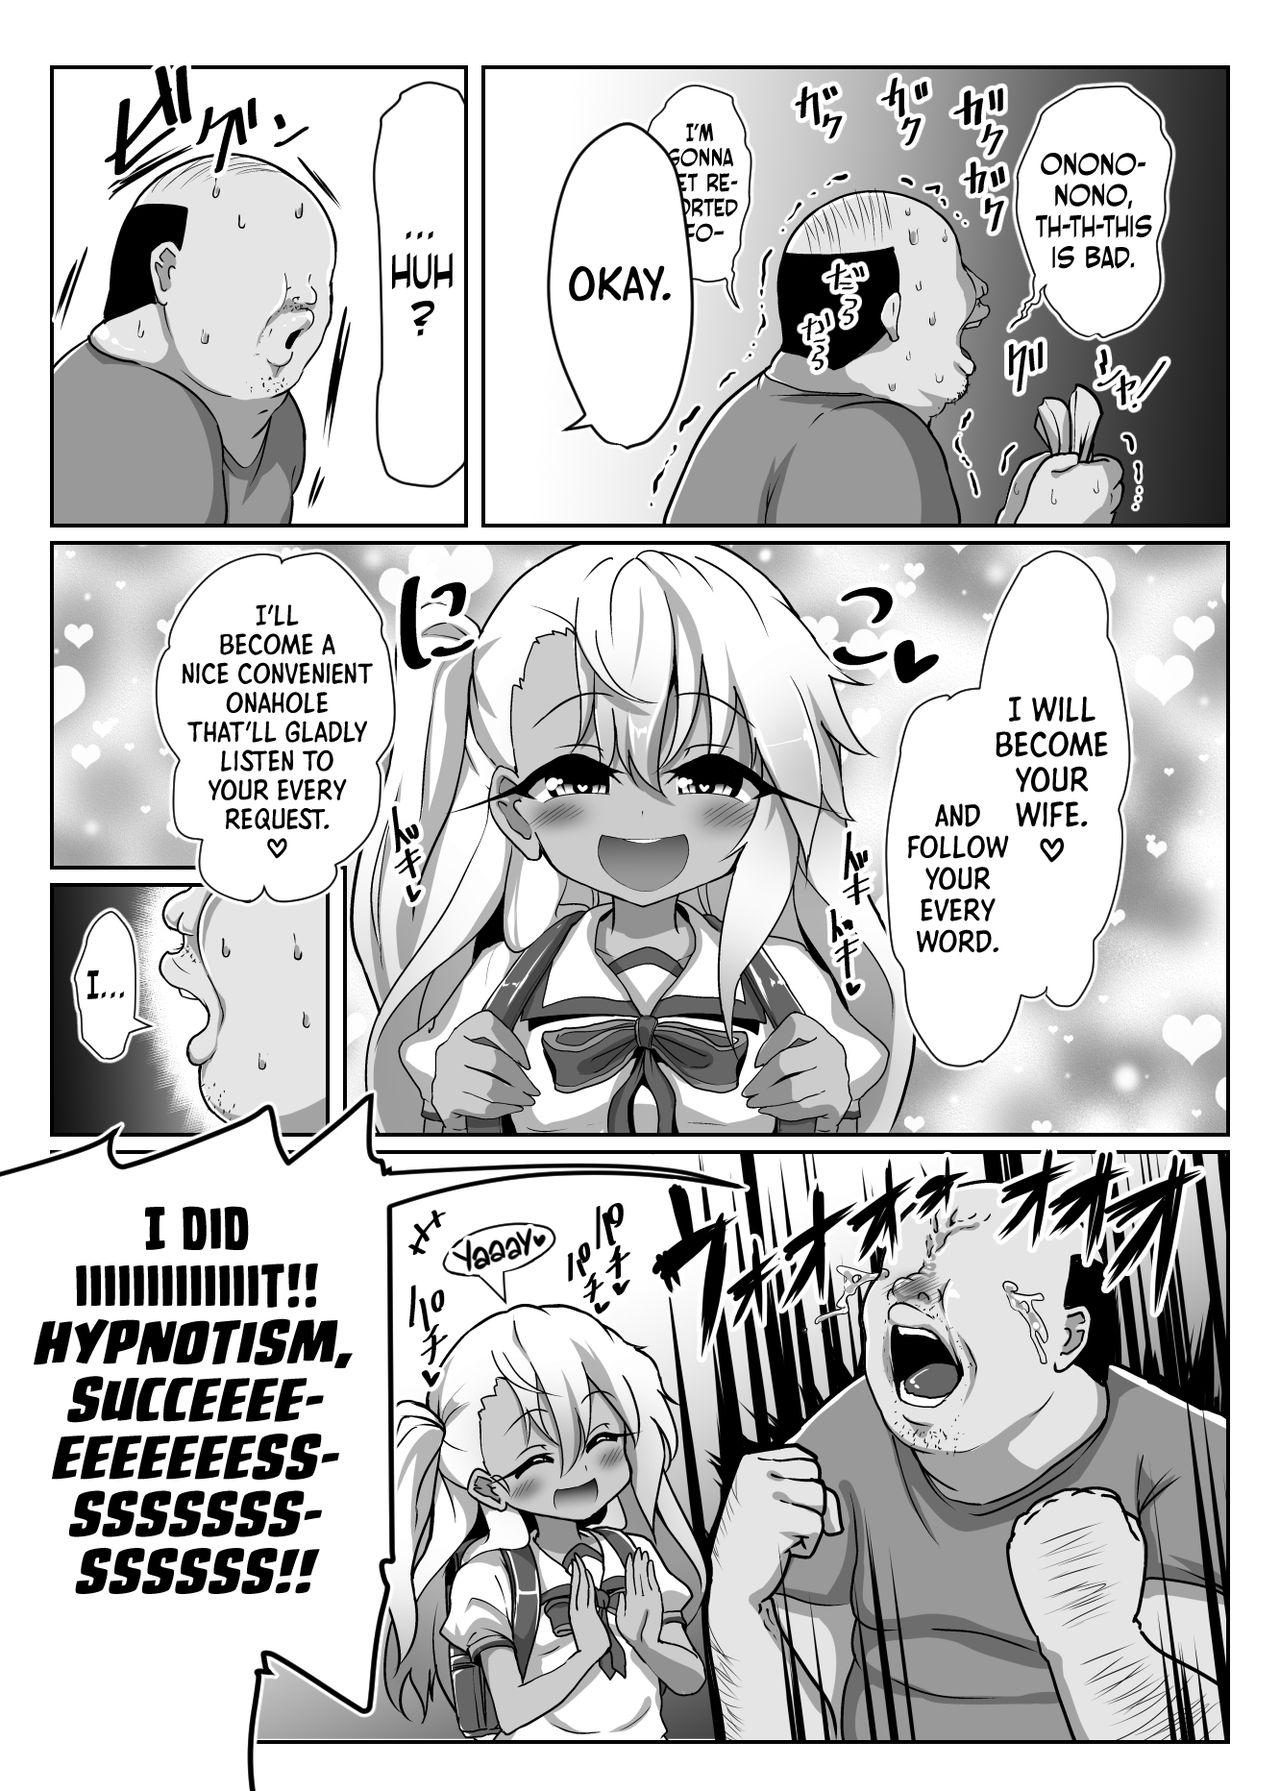 [Kotee] A book where Chloe-chan pretends to be hypnotized and relentlessly gives birth over and over to a disgusting old micro-dicked virgin’s babies. (Fate/kaleid liner Prisma Illya) [English] [Secluded] [Digital] 3